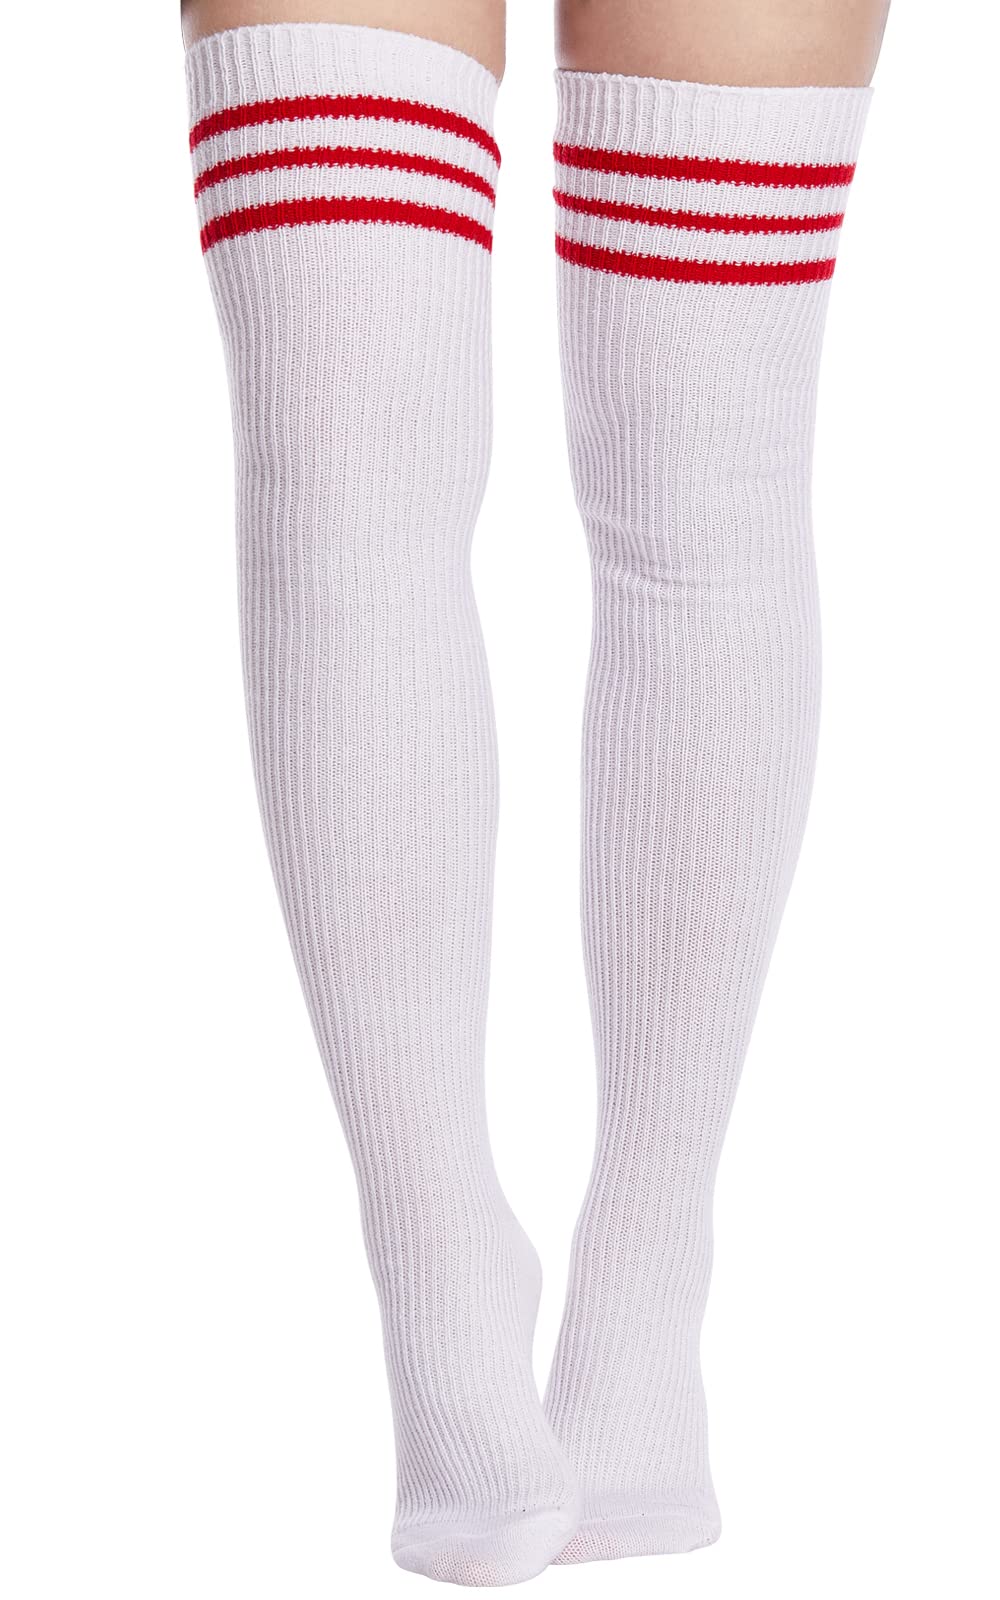 Extra Long Warm Knit Striped Thigh Highs Leg Warmers-Christmas White & Red - Moon Wood